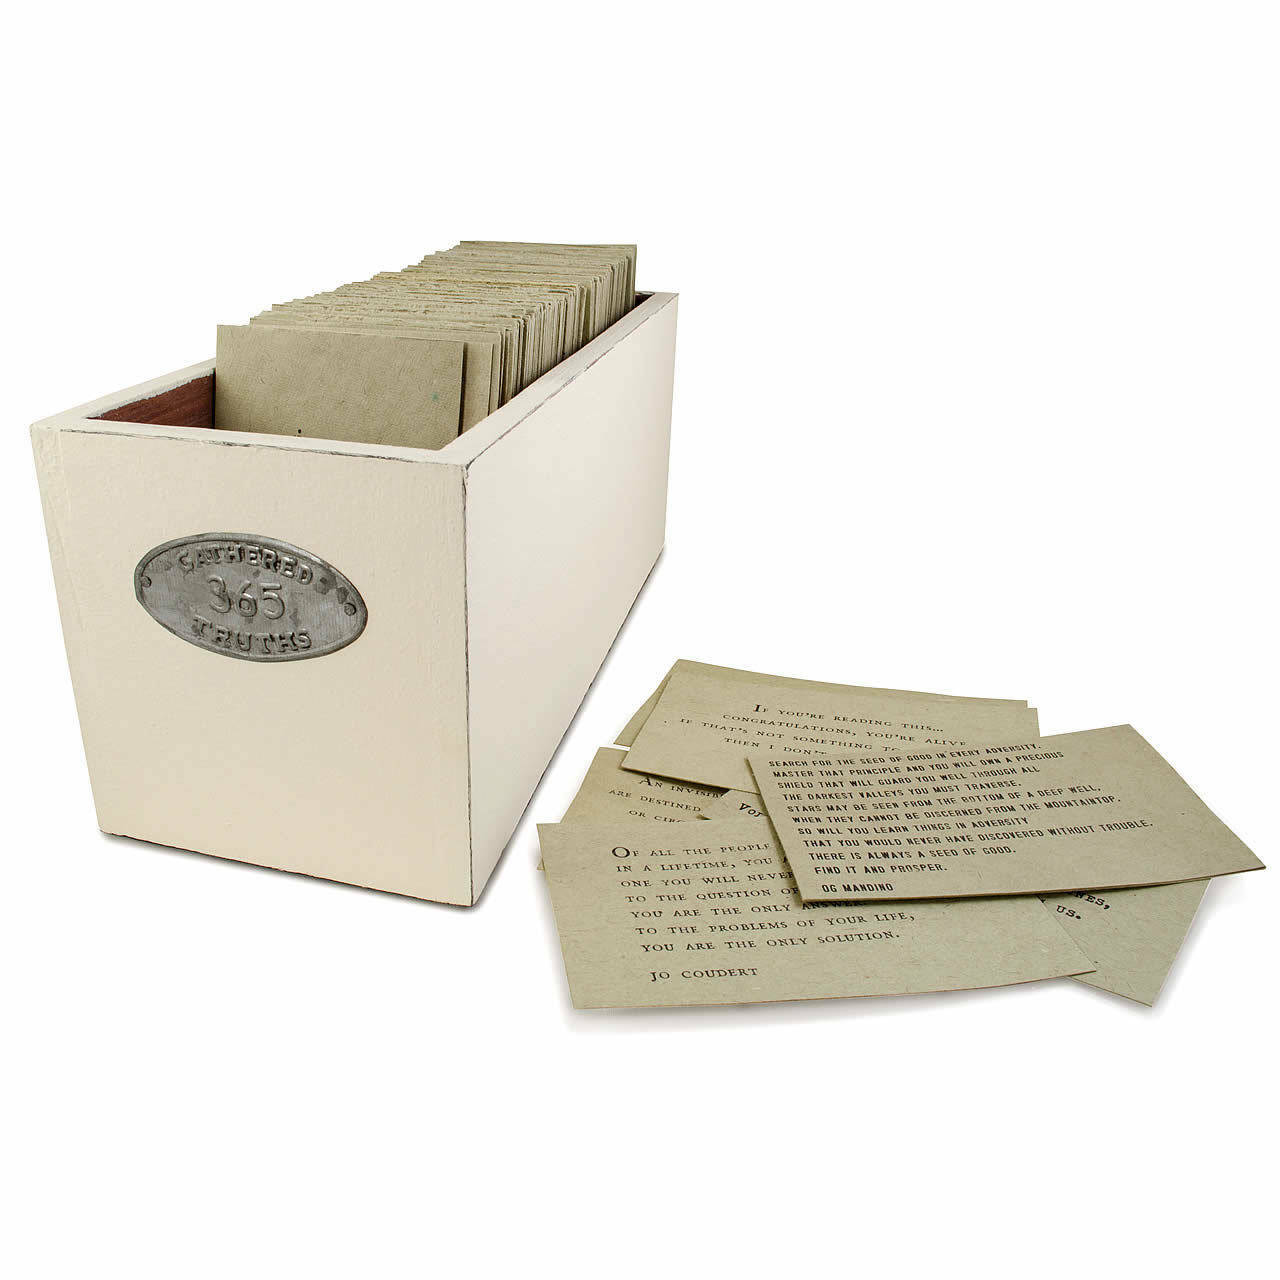 365 Gathered Thought Cards Box Set